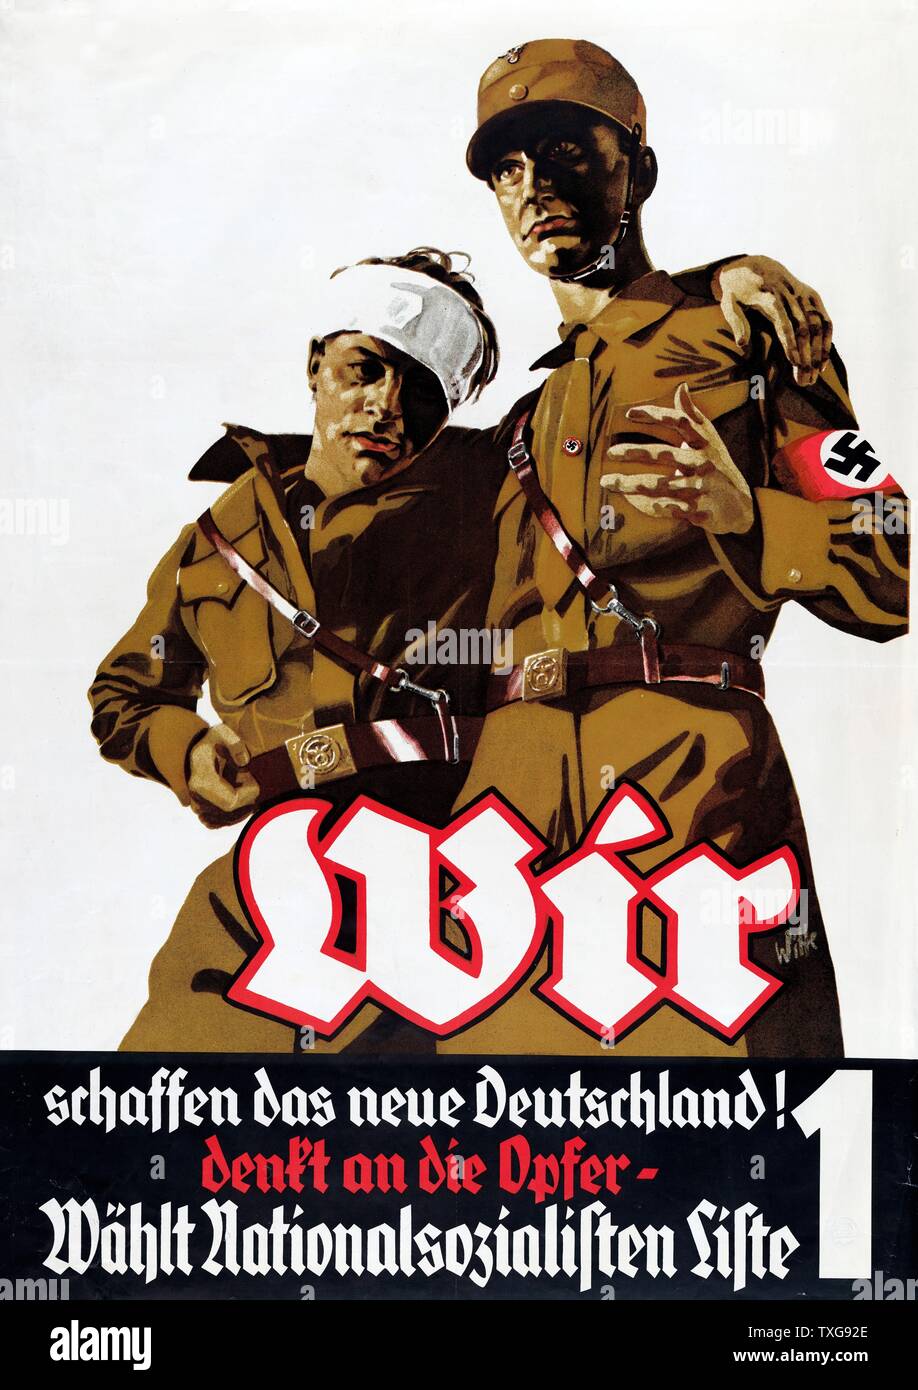 Nazi poster Two soldiers, one with  bandaged head, say "We (the National Socialists) are creating a new Germany and making sacrifices. Vote Nationalsozialistische Deutsche Arbeiter-Partei, No 1 on list" Stock Photo